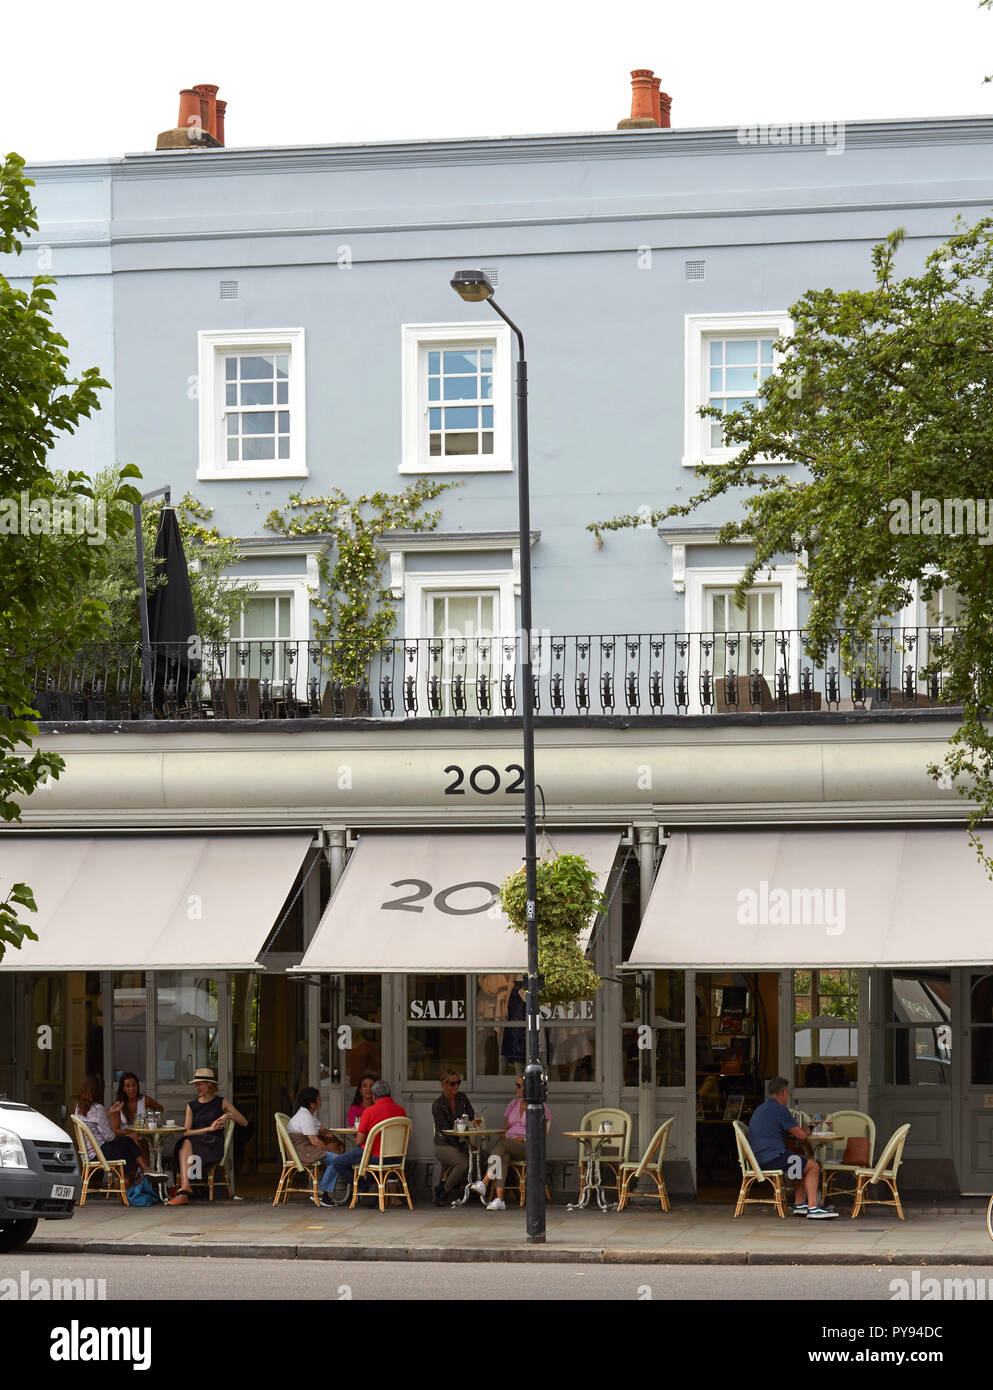 General retail in Notting Hill. Architectural Stock, London, United Kingdom. Architect: NA , 2017. Stock Photo